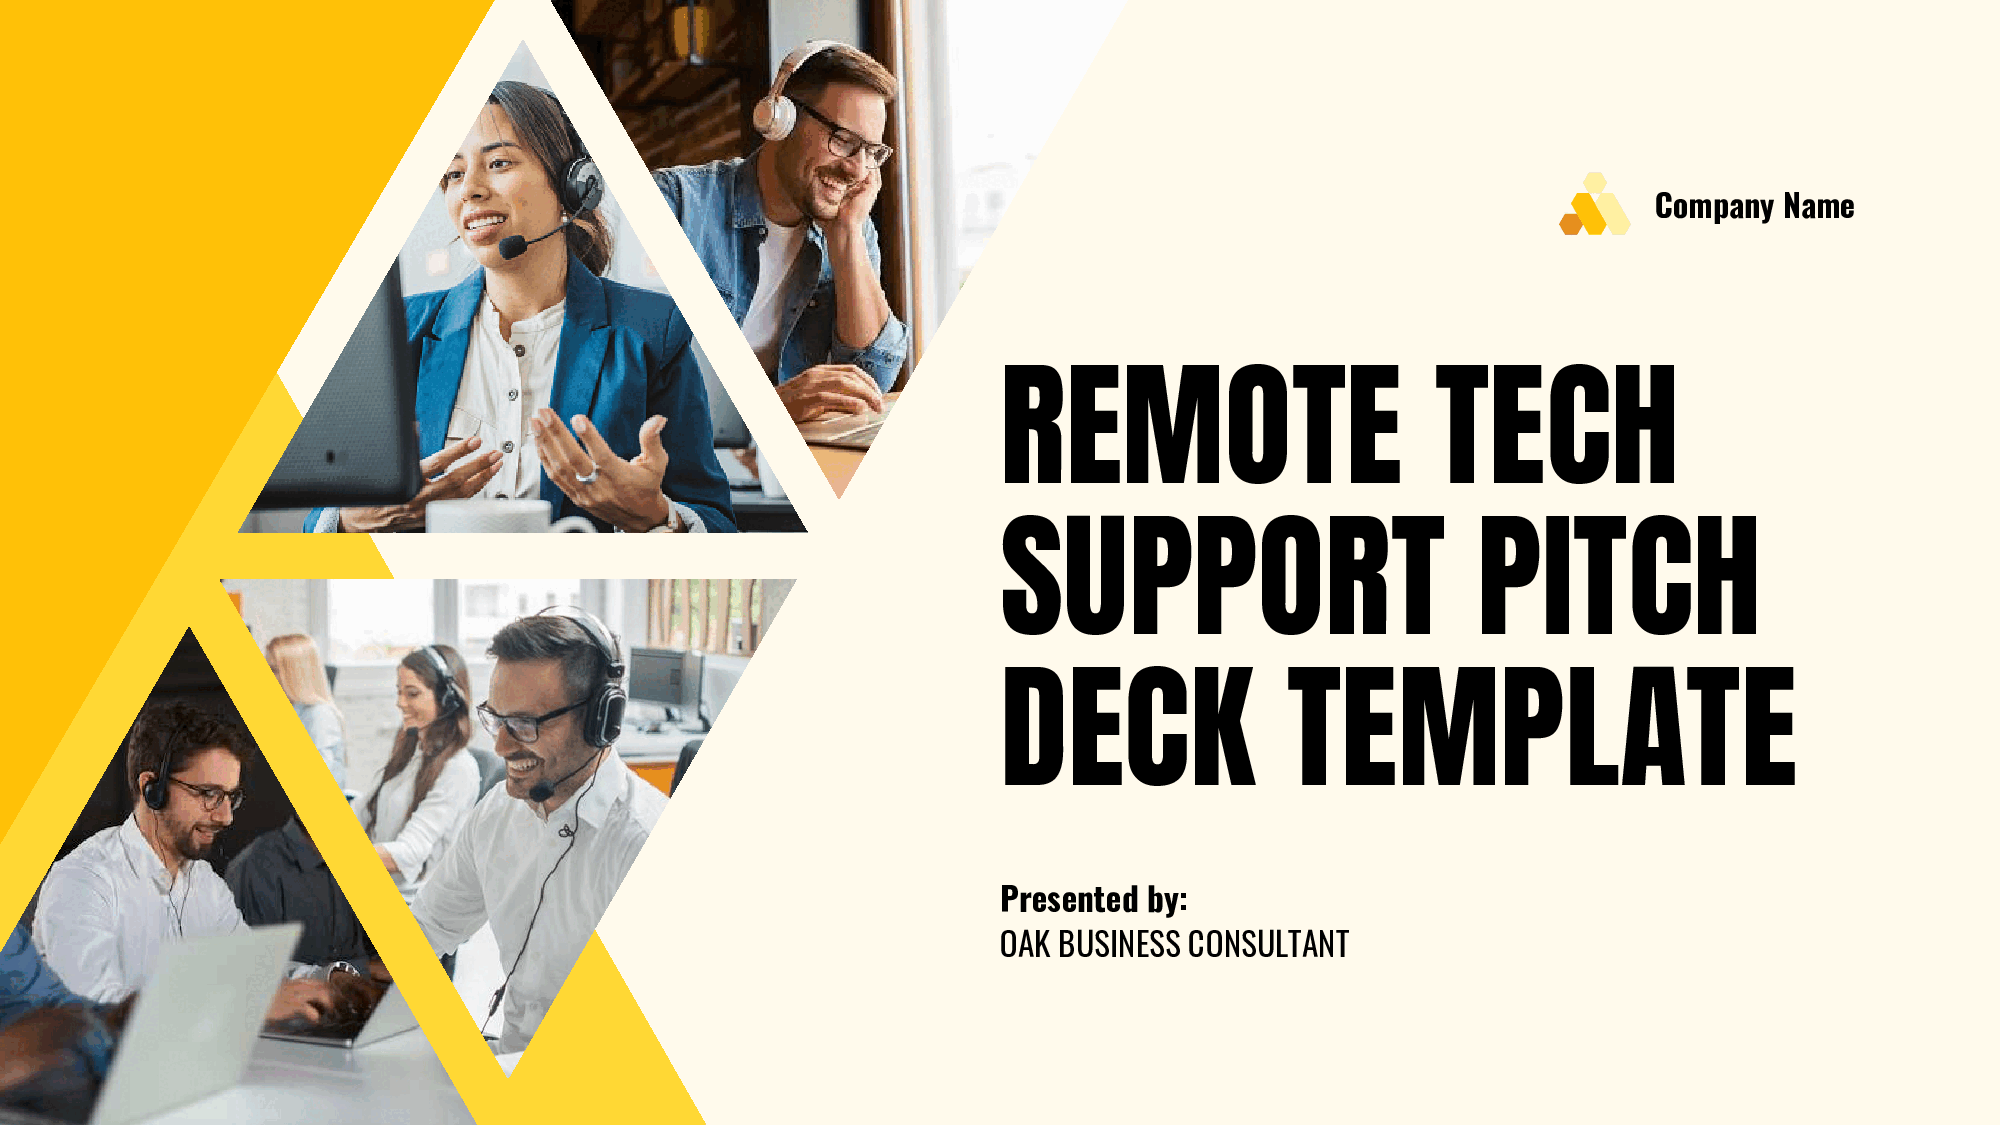 Remote Tech Support Pitch Deck Template